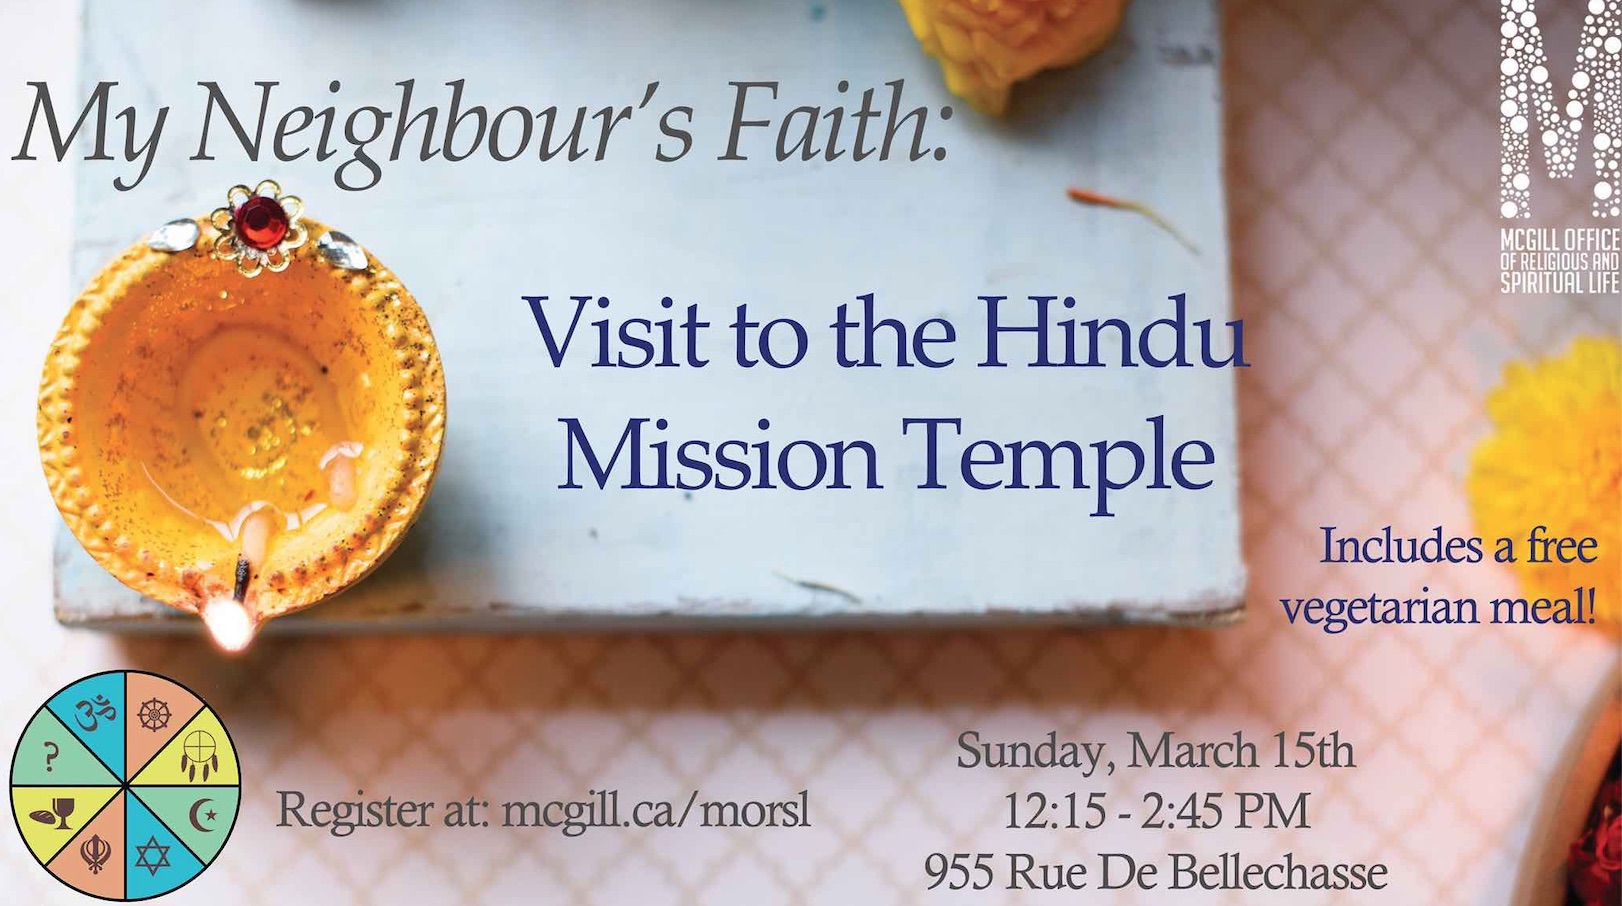 My Neighbour’s Faith: Visit to the Hindu Mission Temple